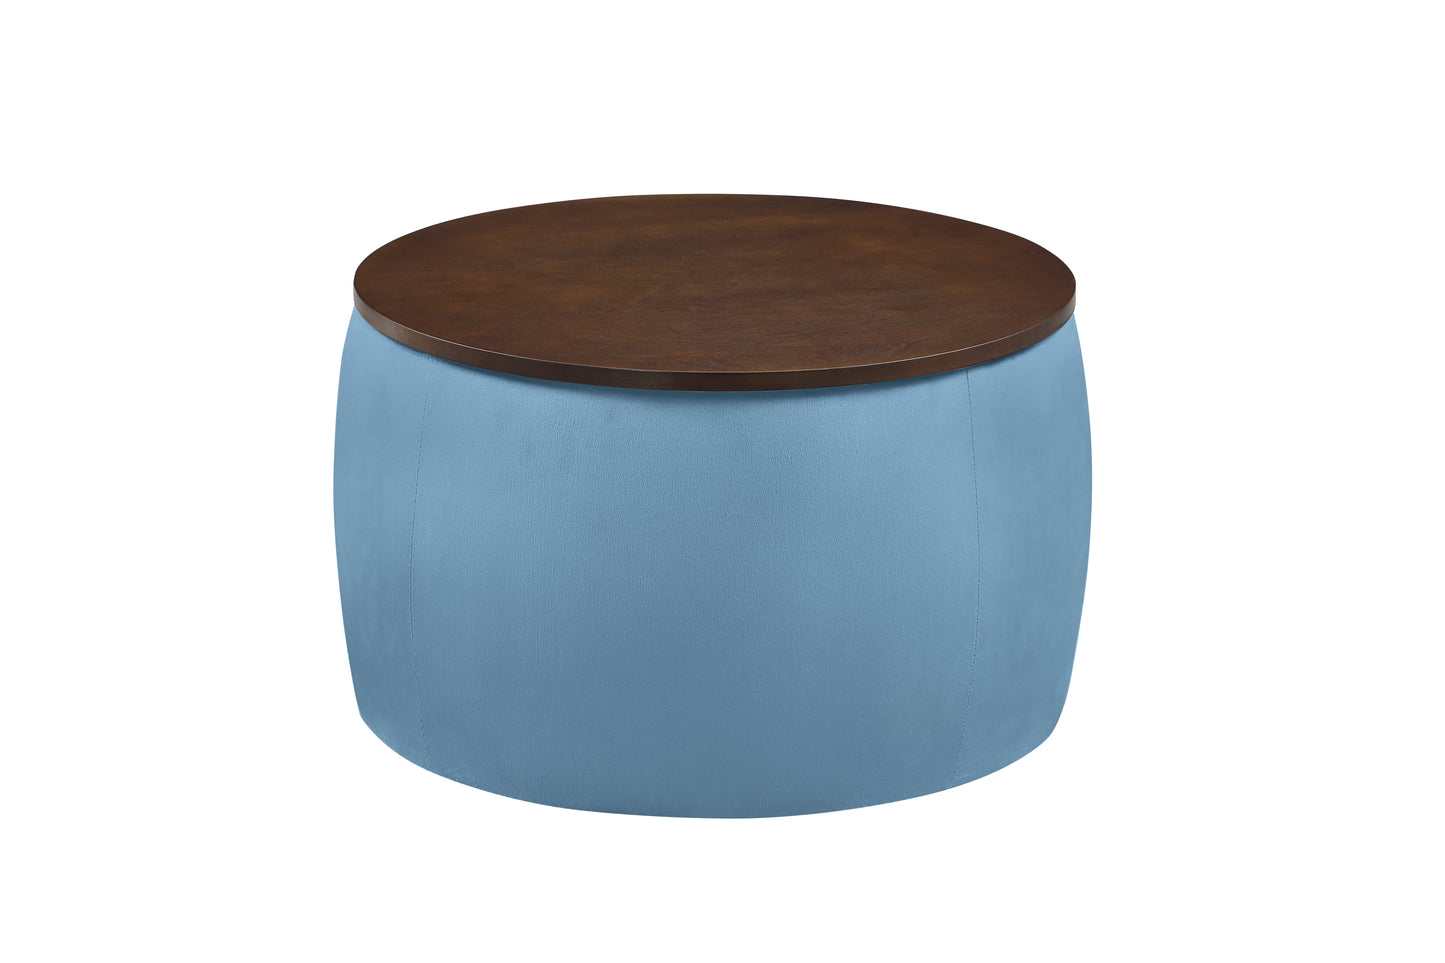 Round Ottoman Set with Storage and Reversible Lid - Versatile Furniture Piece for Home